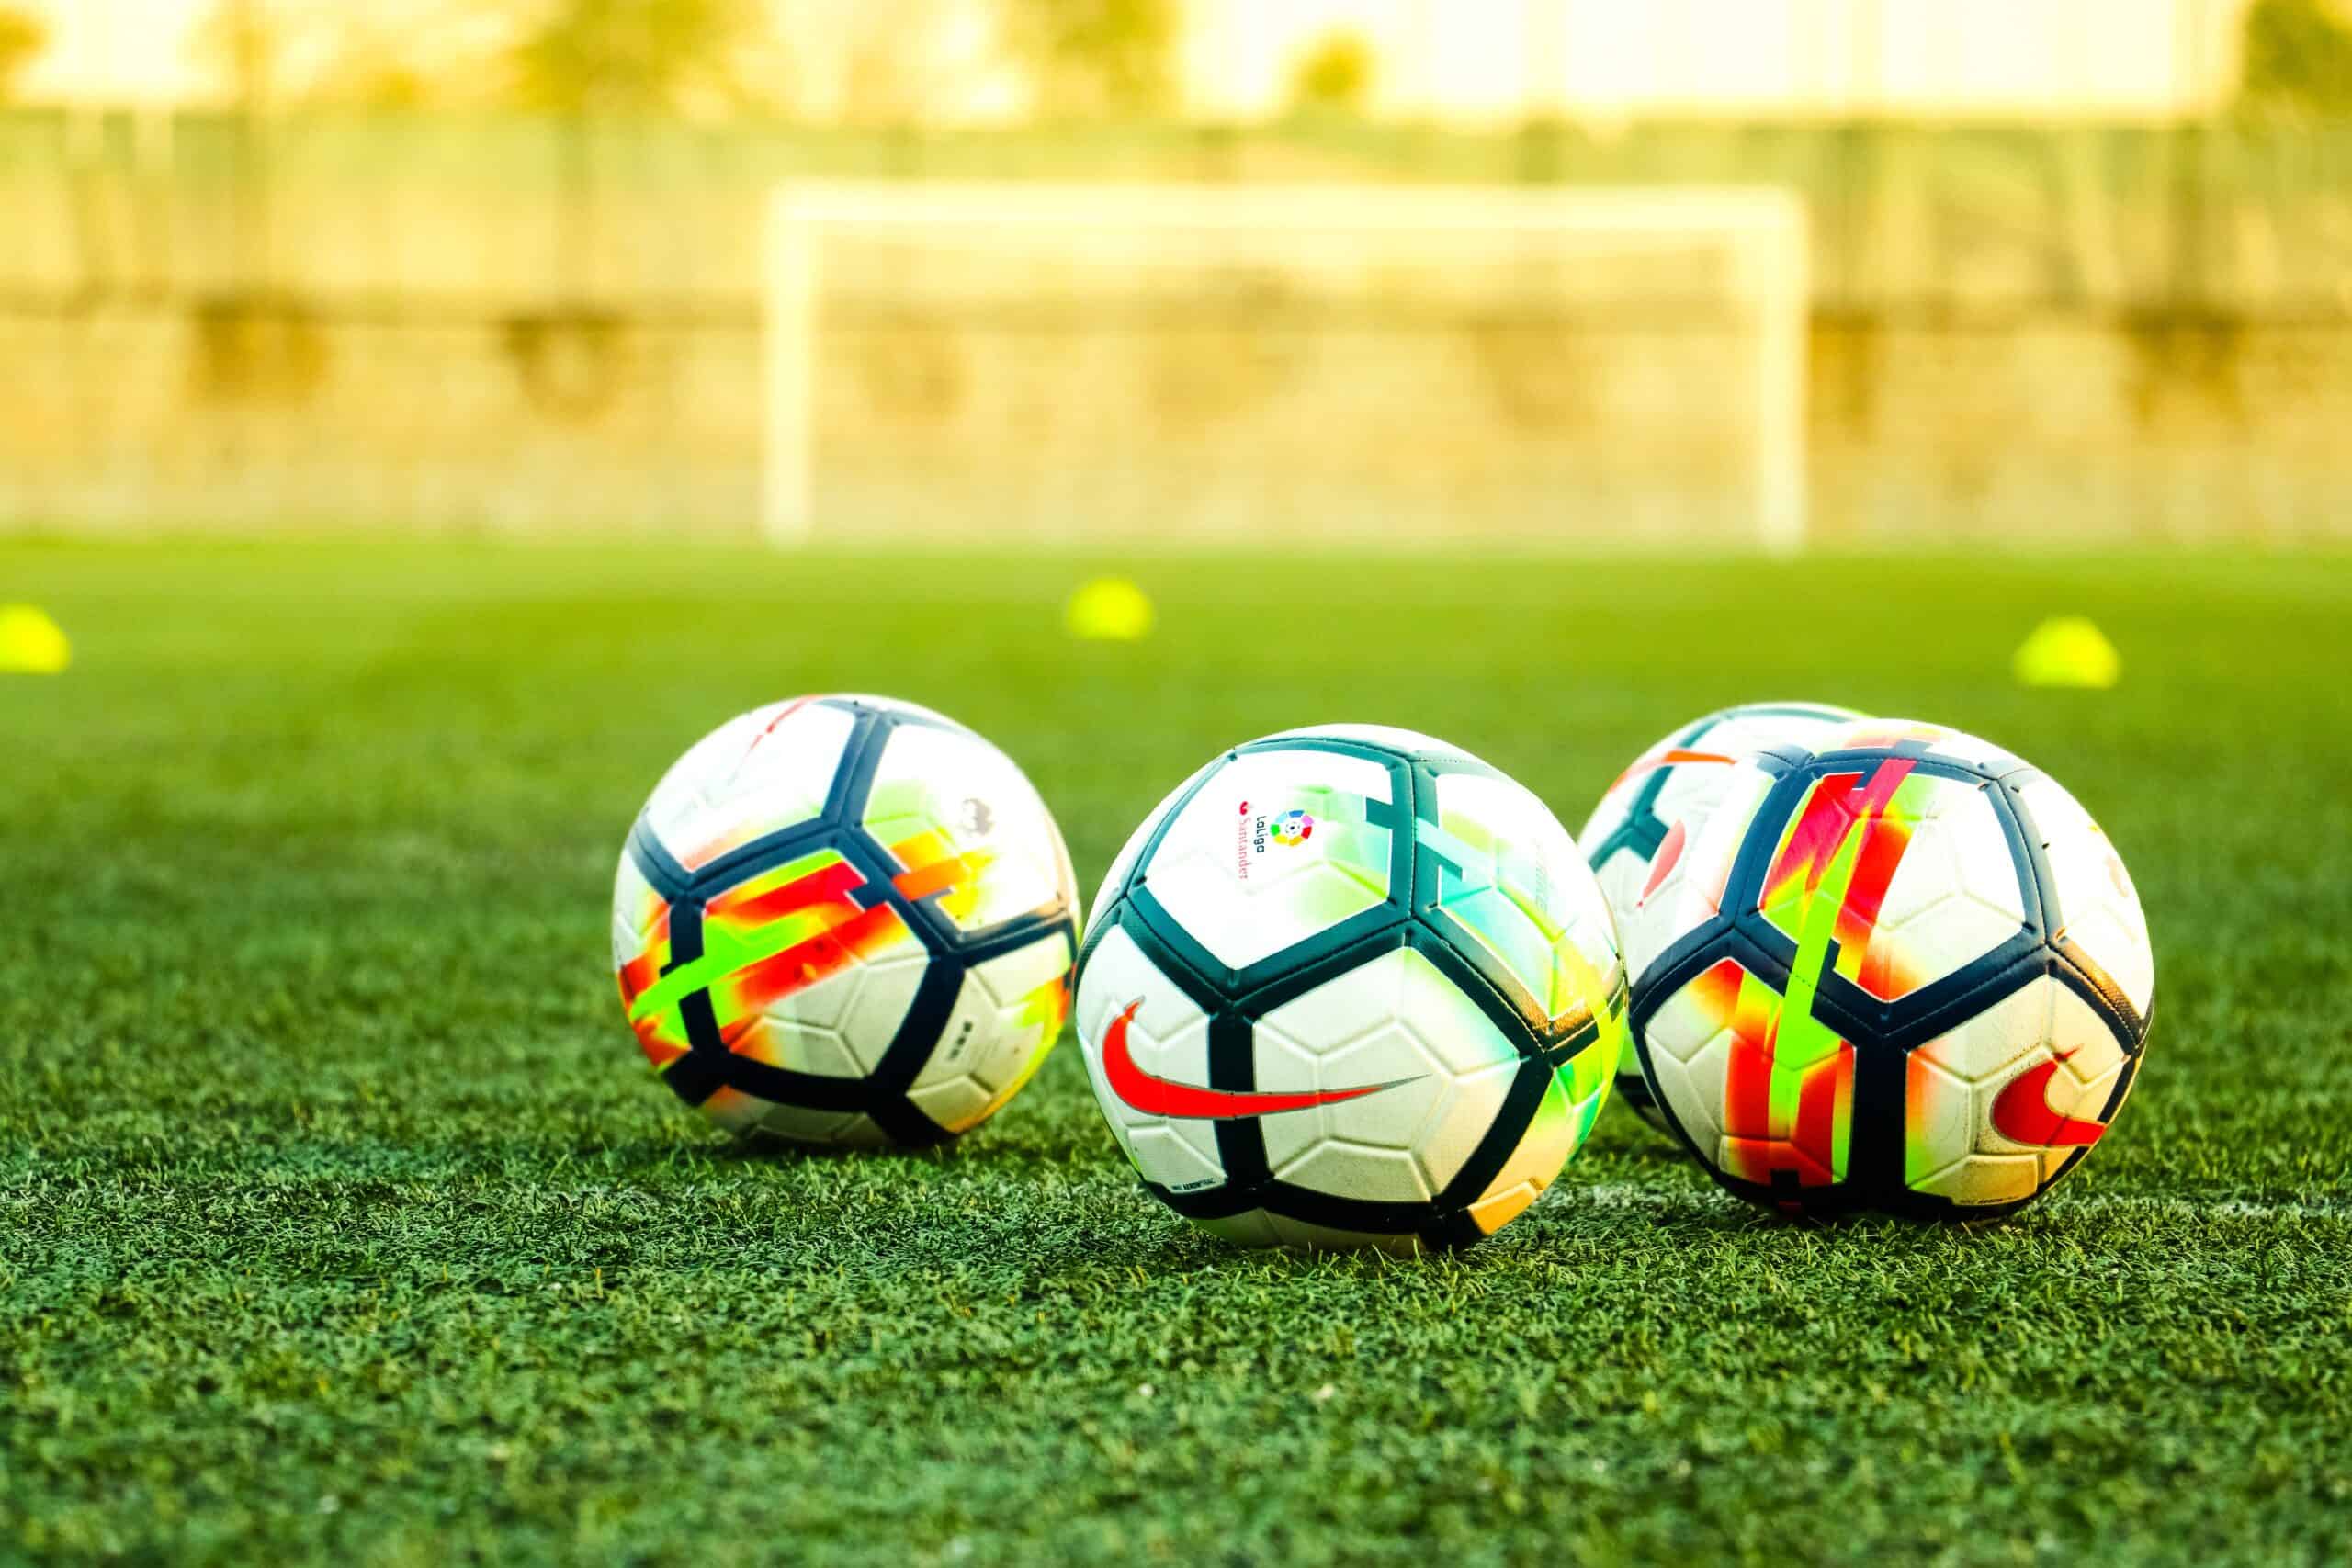 Three soccer balls on soccer field in front of goal